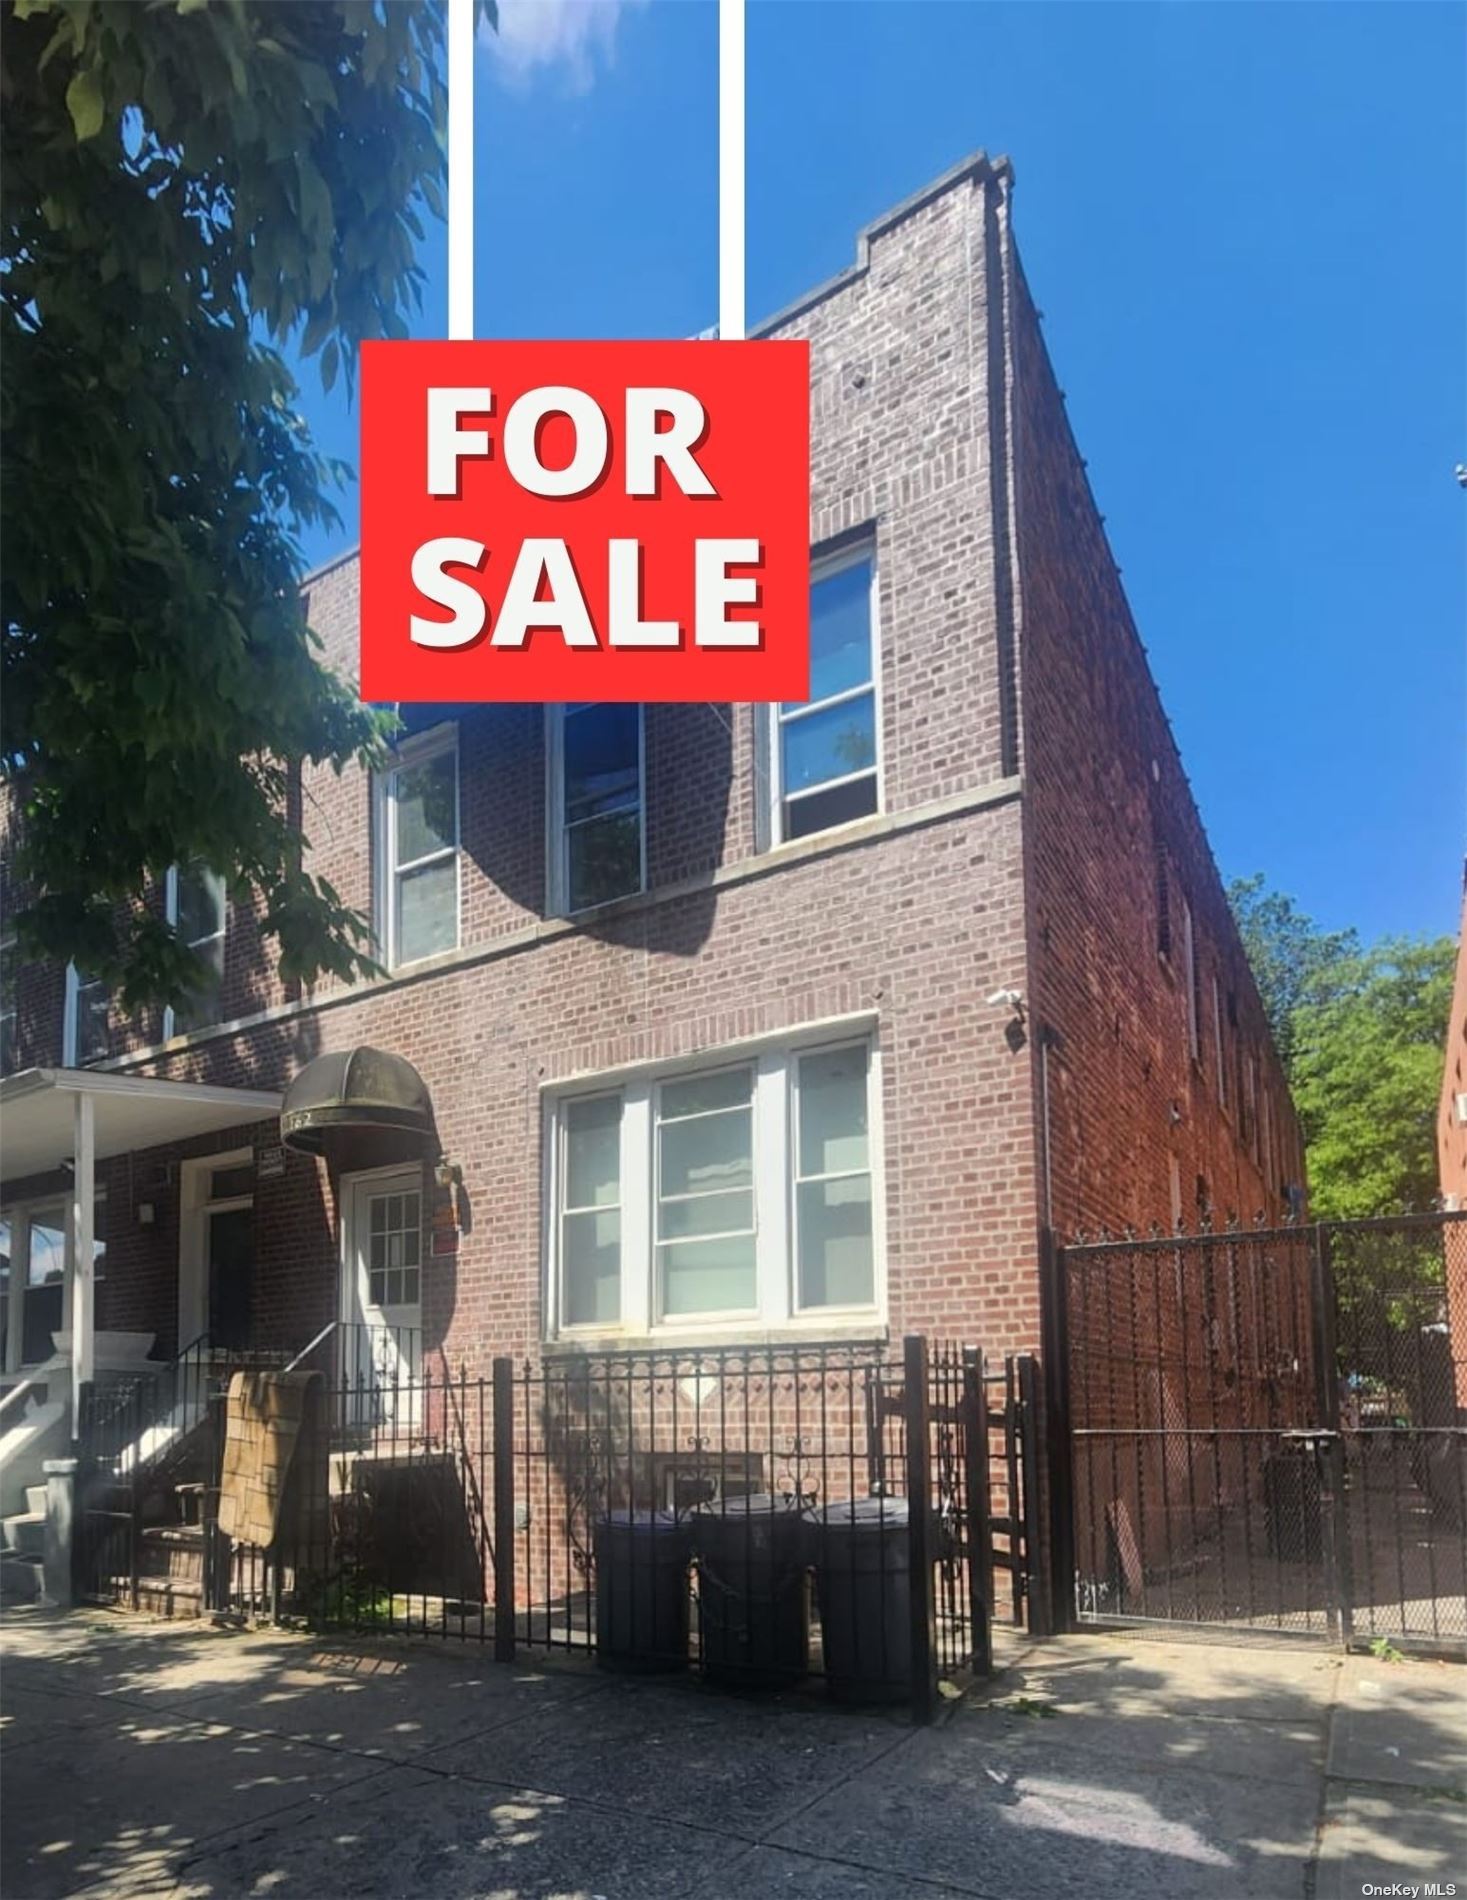 Property for Sale at 1045 Longfellow Avenue, Bronx, New York - Bedrooms: 8 
Bathrooms: 4 
Rooms: 24  - $1,200,000